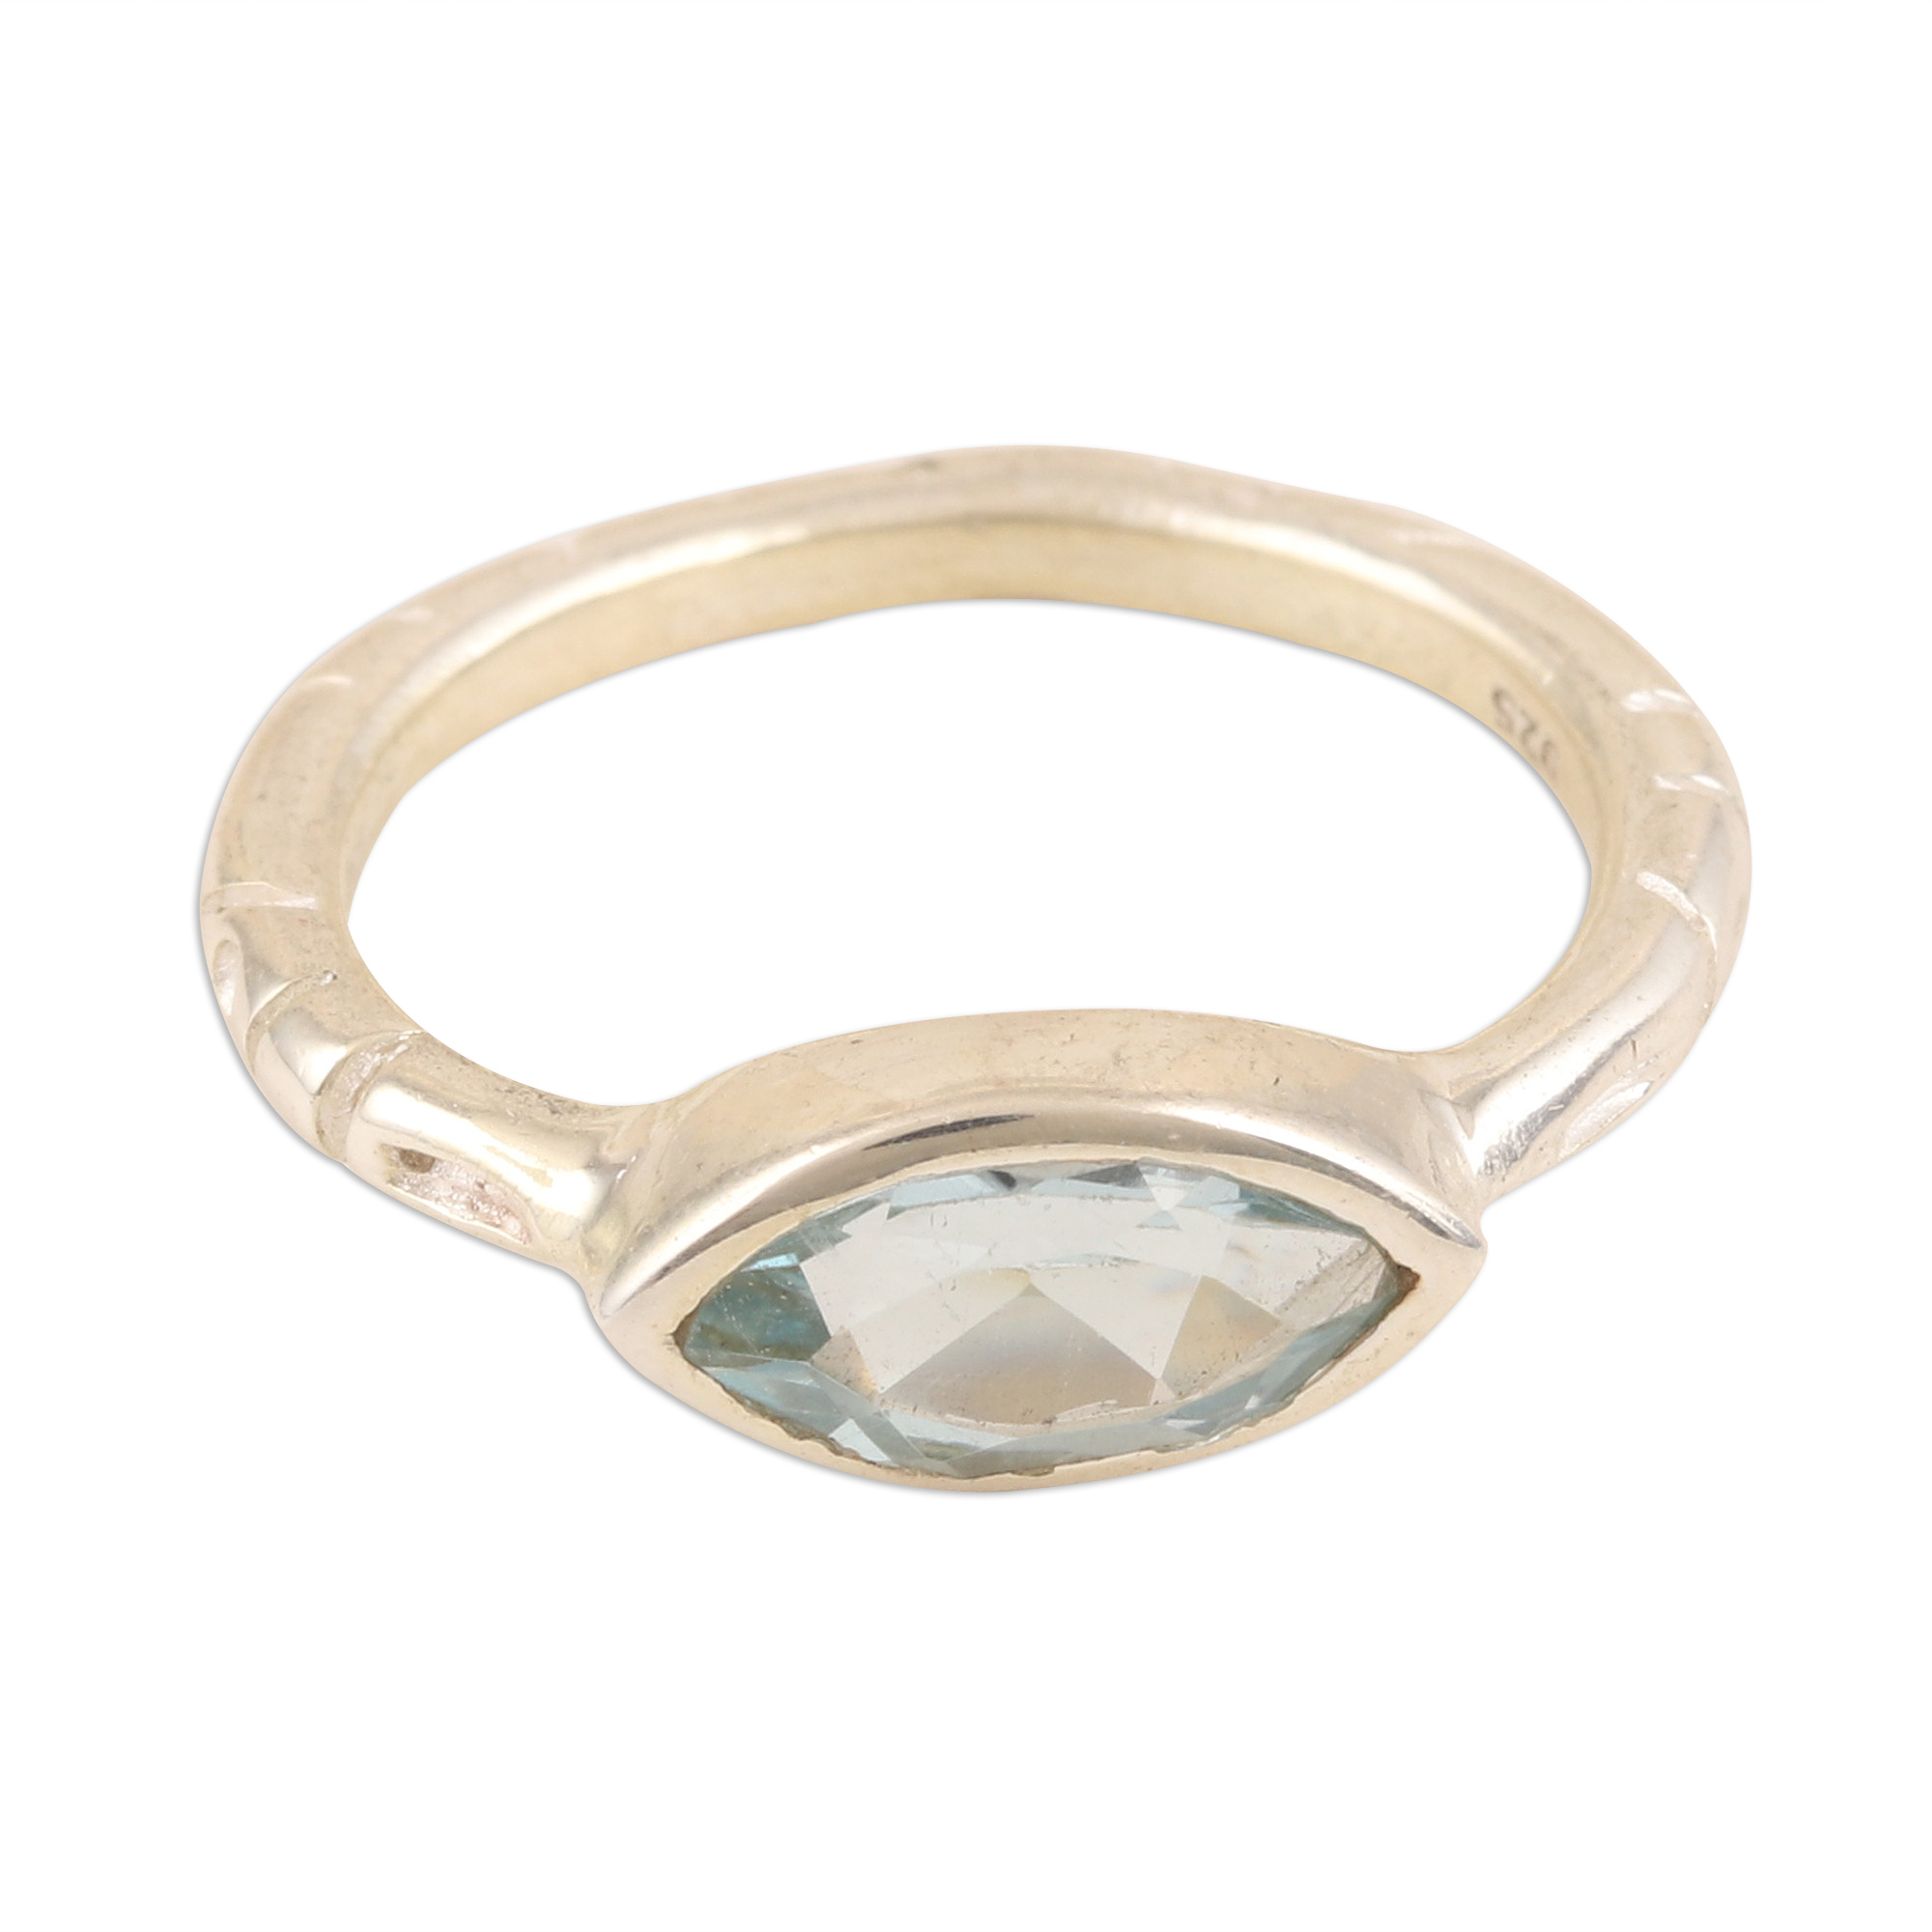 UNICEF Market | Marquise Cut Blue Topaz Ring from India - Delicate Eye